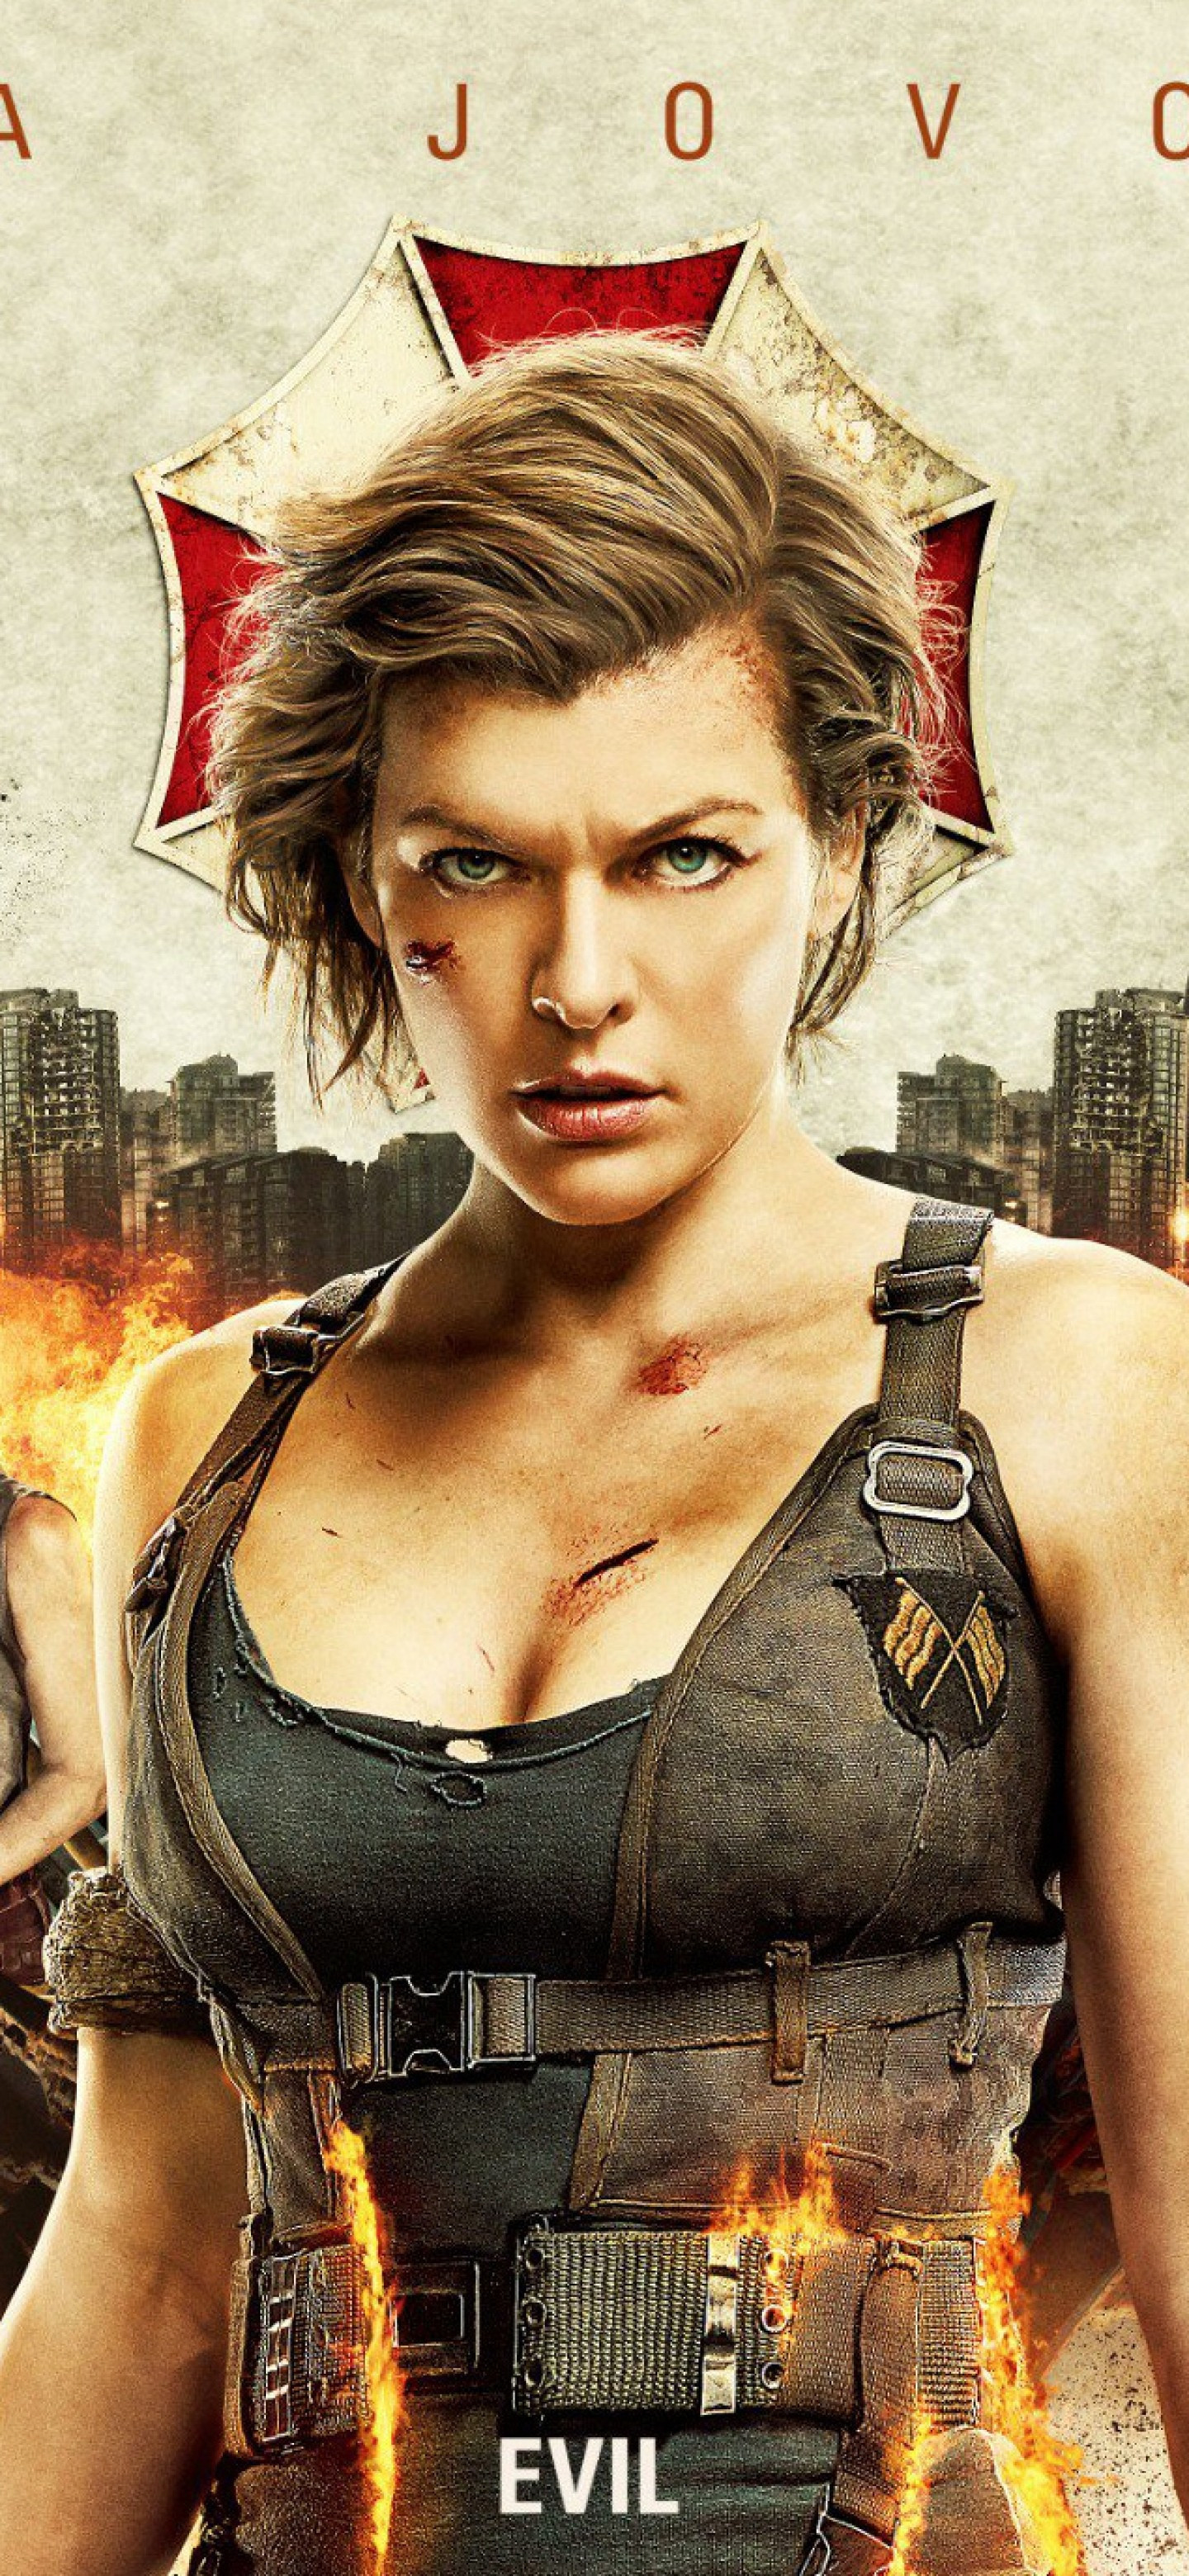 Resident Evil The Final Chapter, Milla Jovovich wallpapers, High-quality for Huawei Mate 20 Pro, LG G7 ThinQ, LG V40 ThinQ, 1440x3120 HD Handy